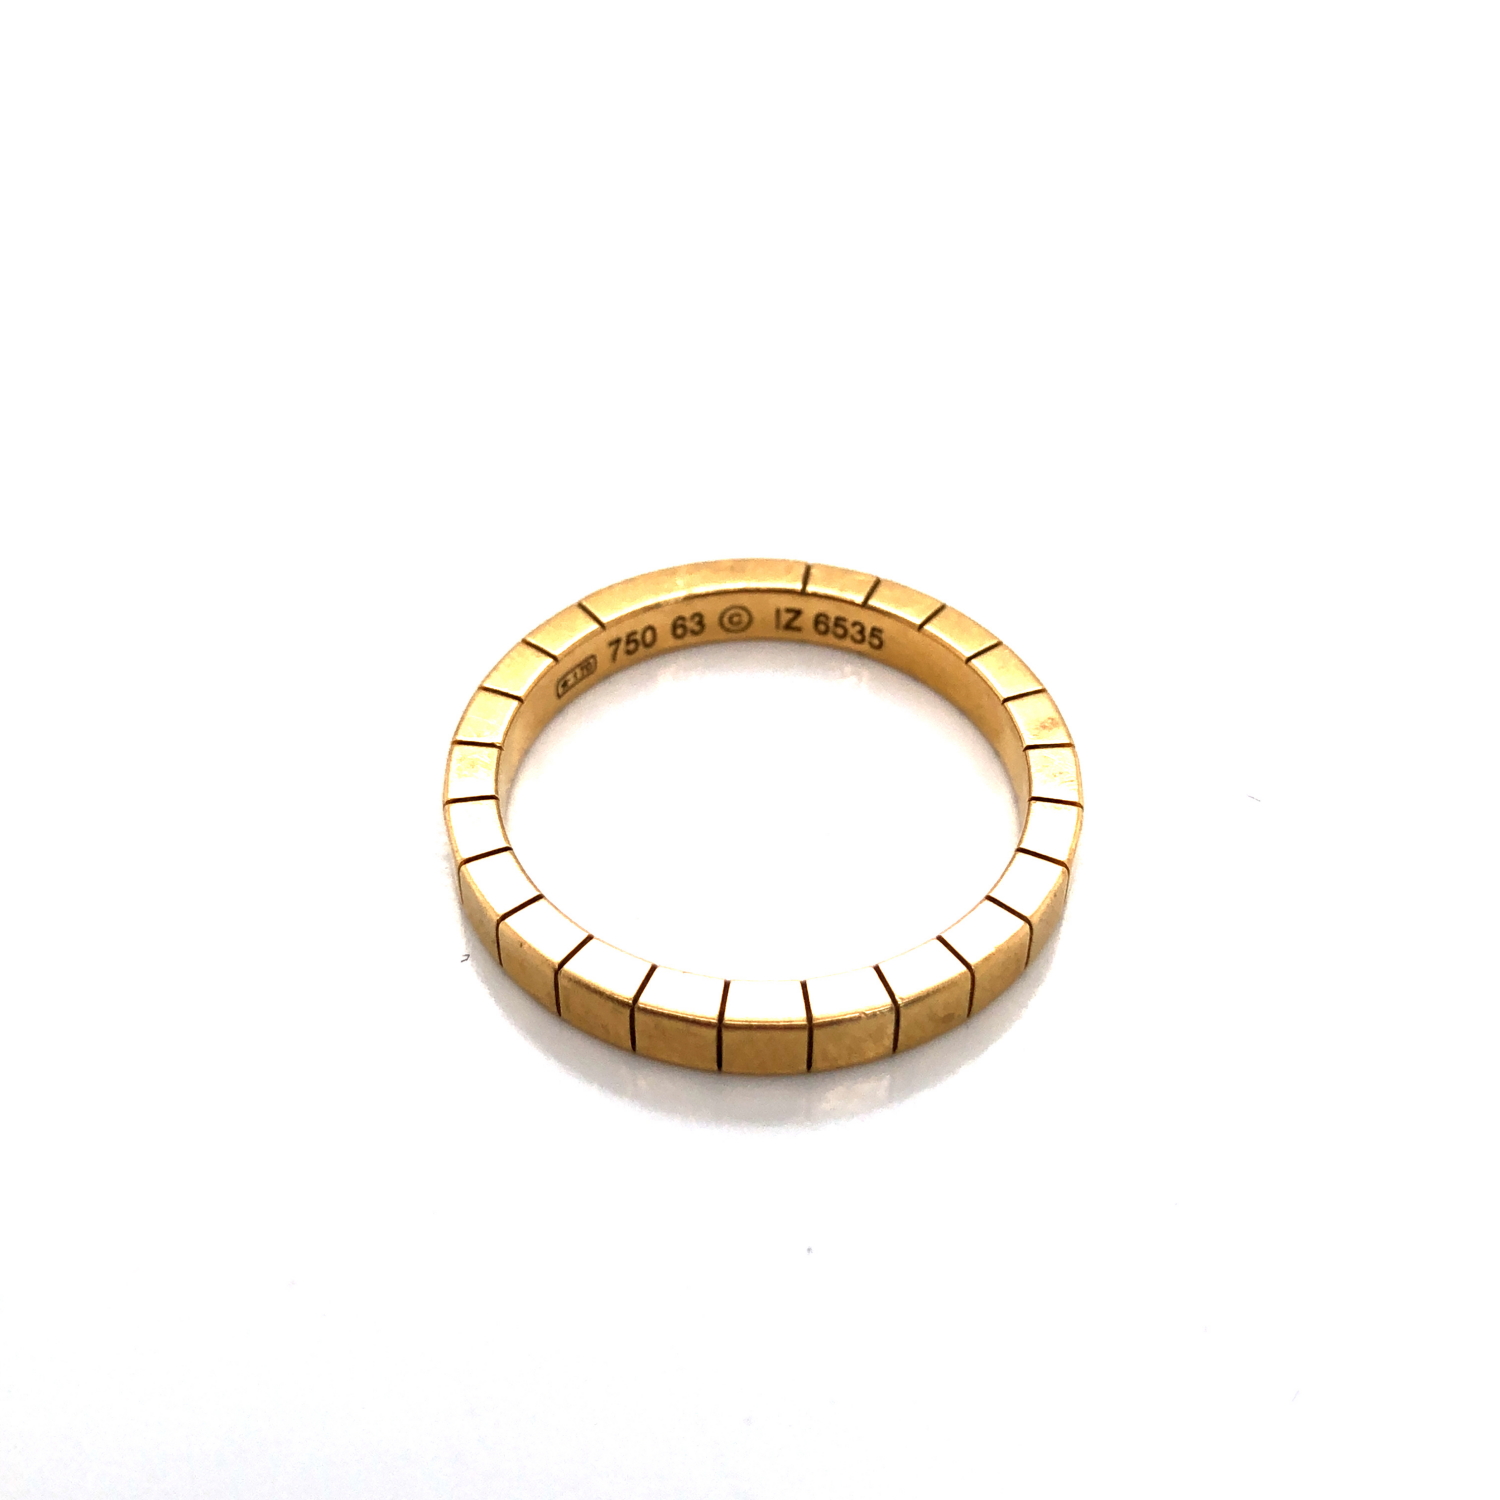 A VINTAGE CARTIER LANIERES BRICK LINK BAND RING. THE RING STAMPED 750, 63, 12, 6535. FINGER SIZE